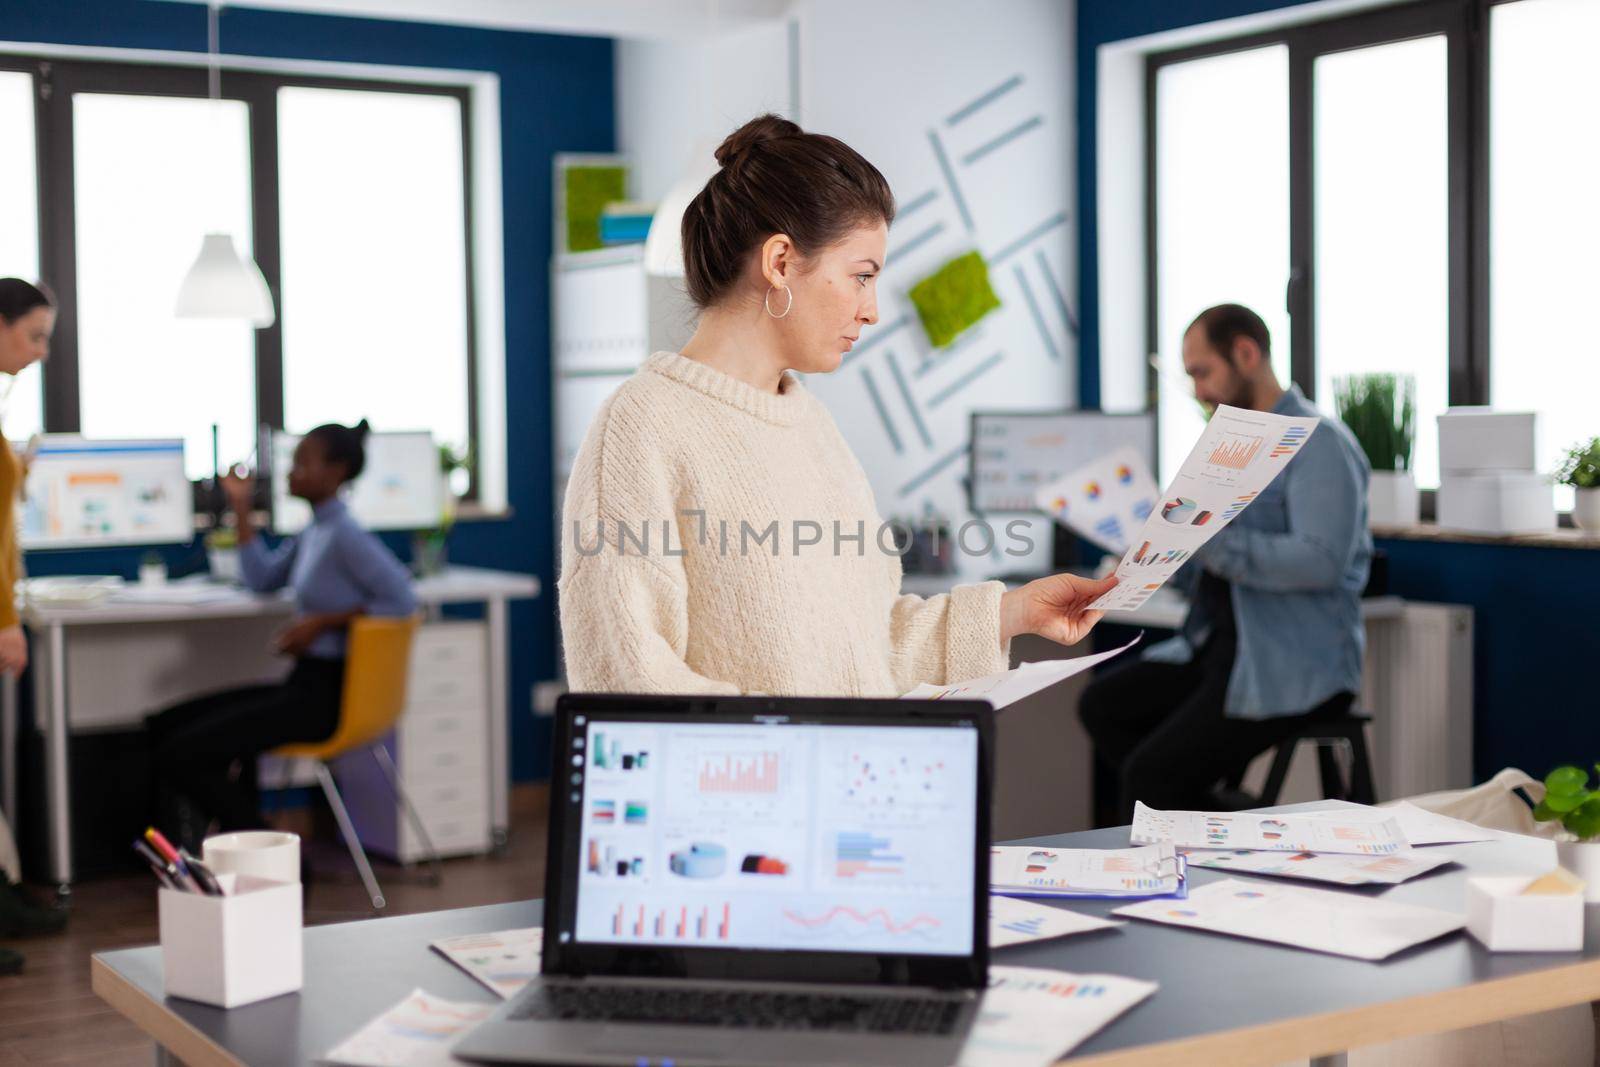 Corporate businesswoman reading statistics in start up company office. Successful corporate professional entrepreneur online internet statistics. Executive entrepreneur, manager leader standing working on projects with diverse colleagues.